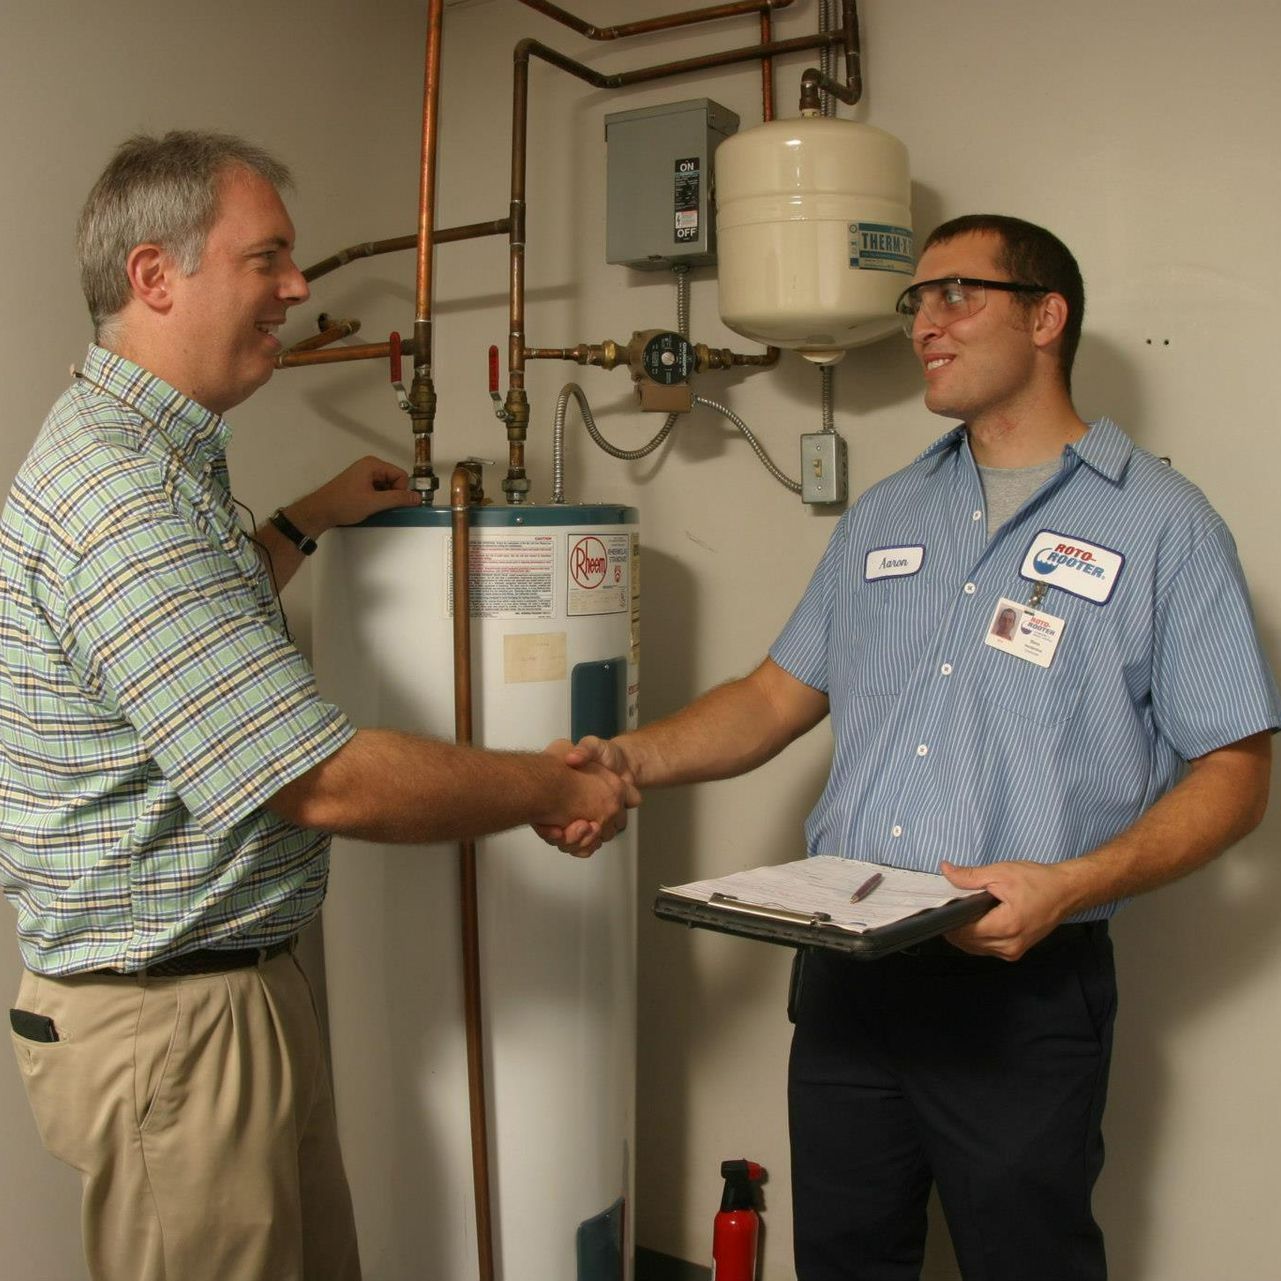 Water Heater Repair – Apple Valley, CA – Roto-Rooter Plumbers and Septic Service